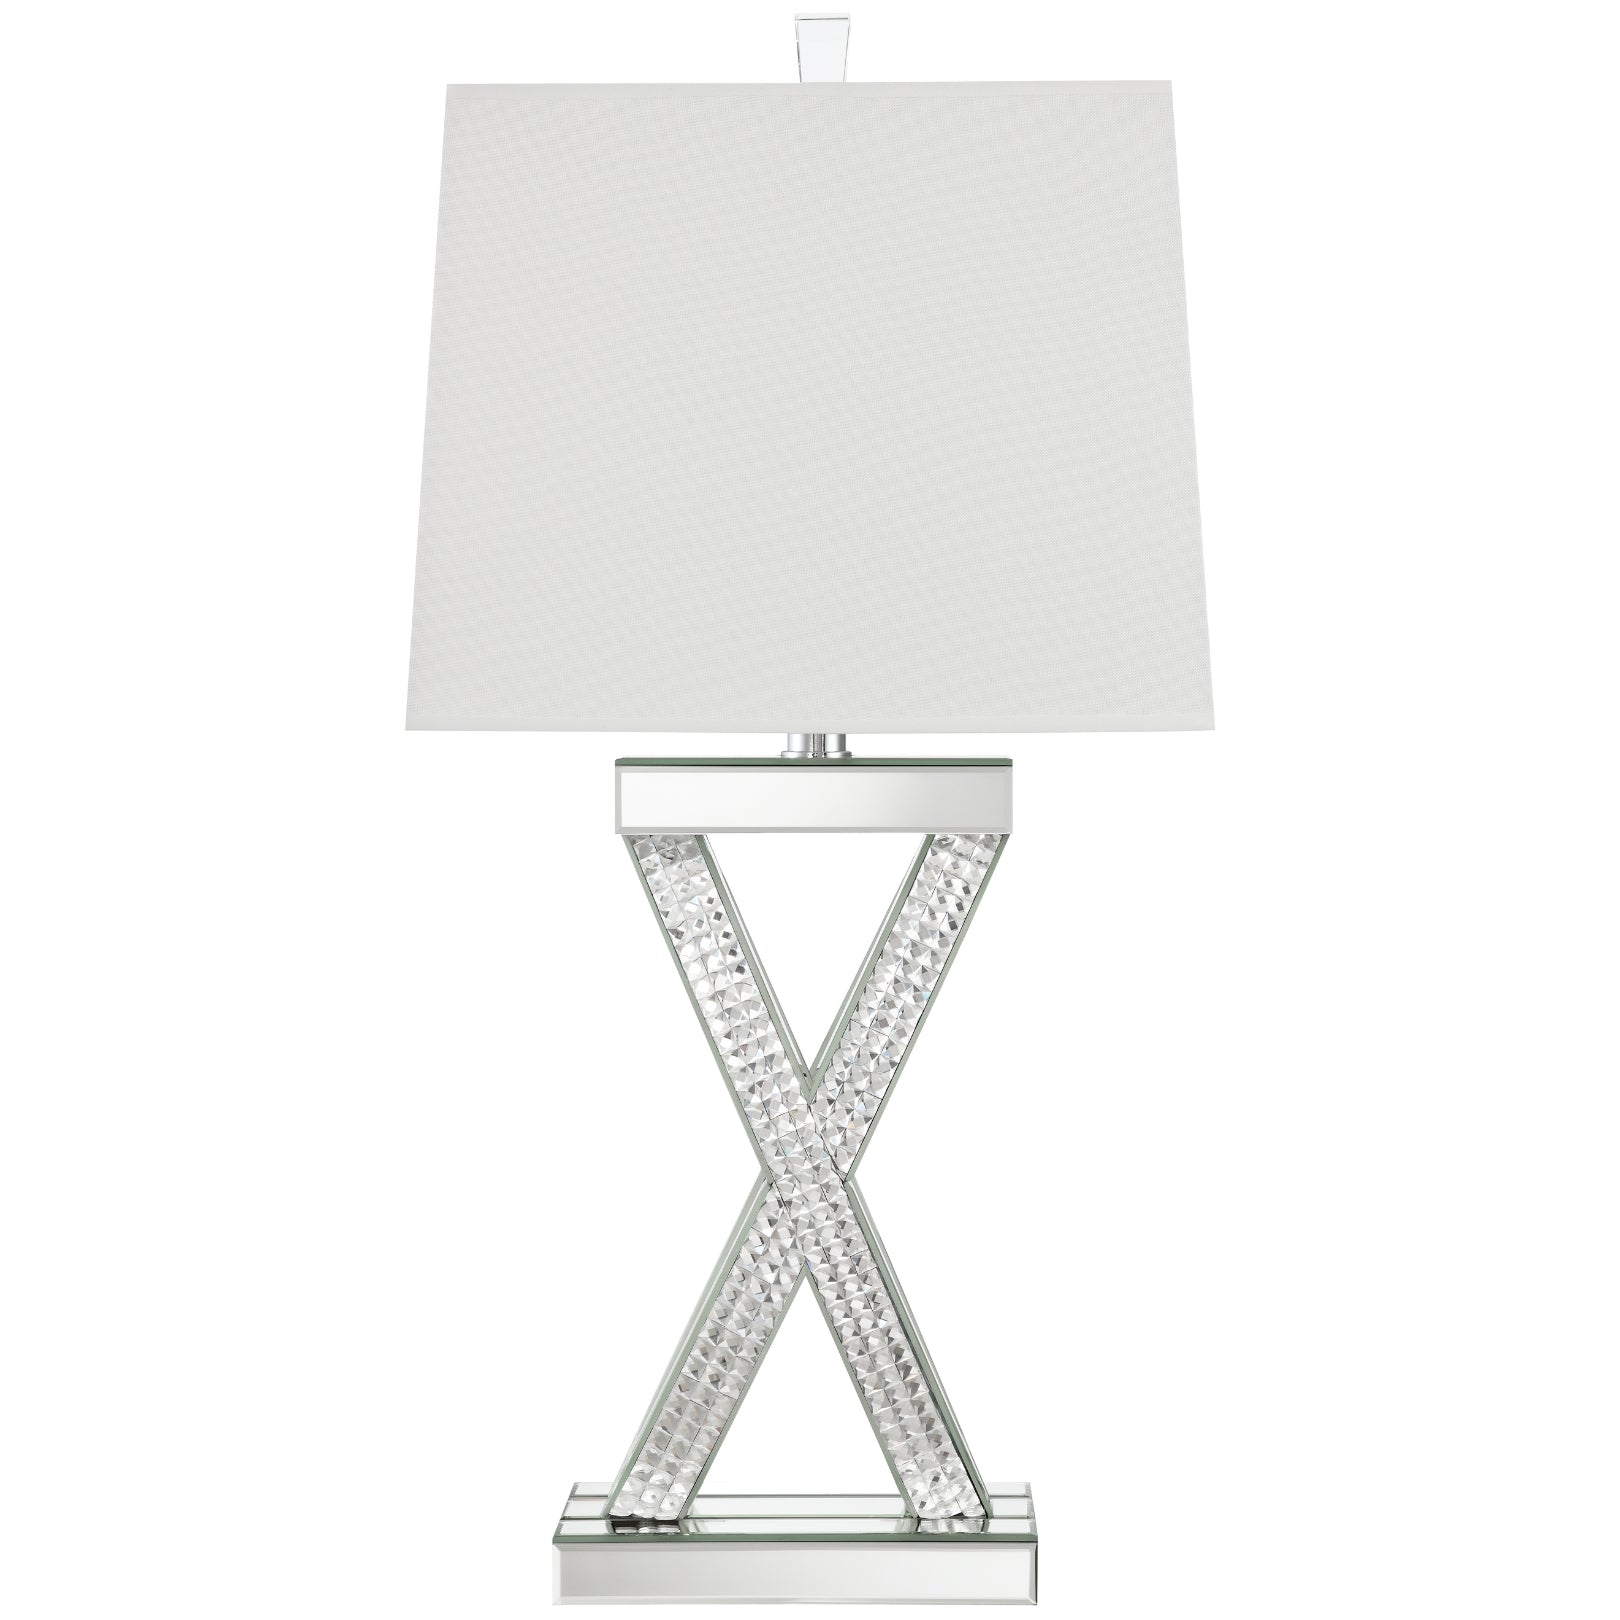 Dominick Table Lamp